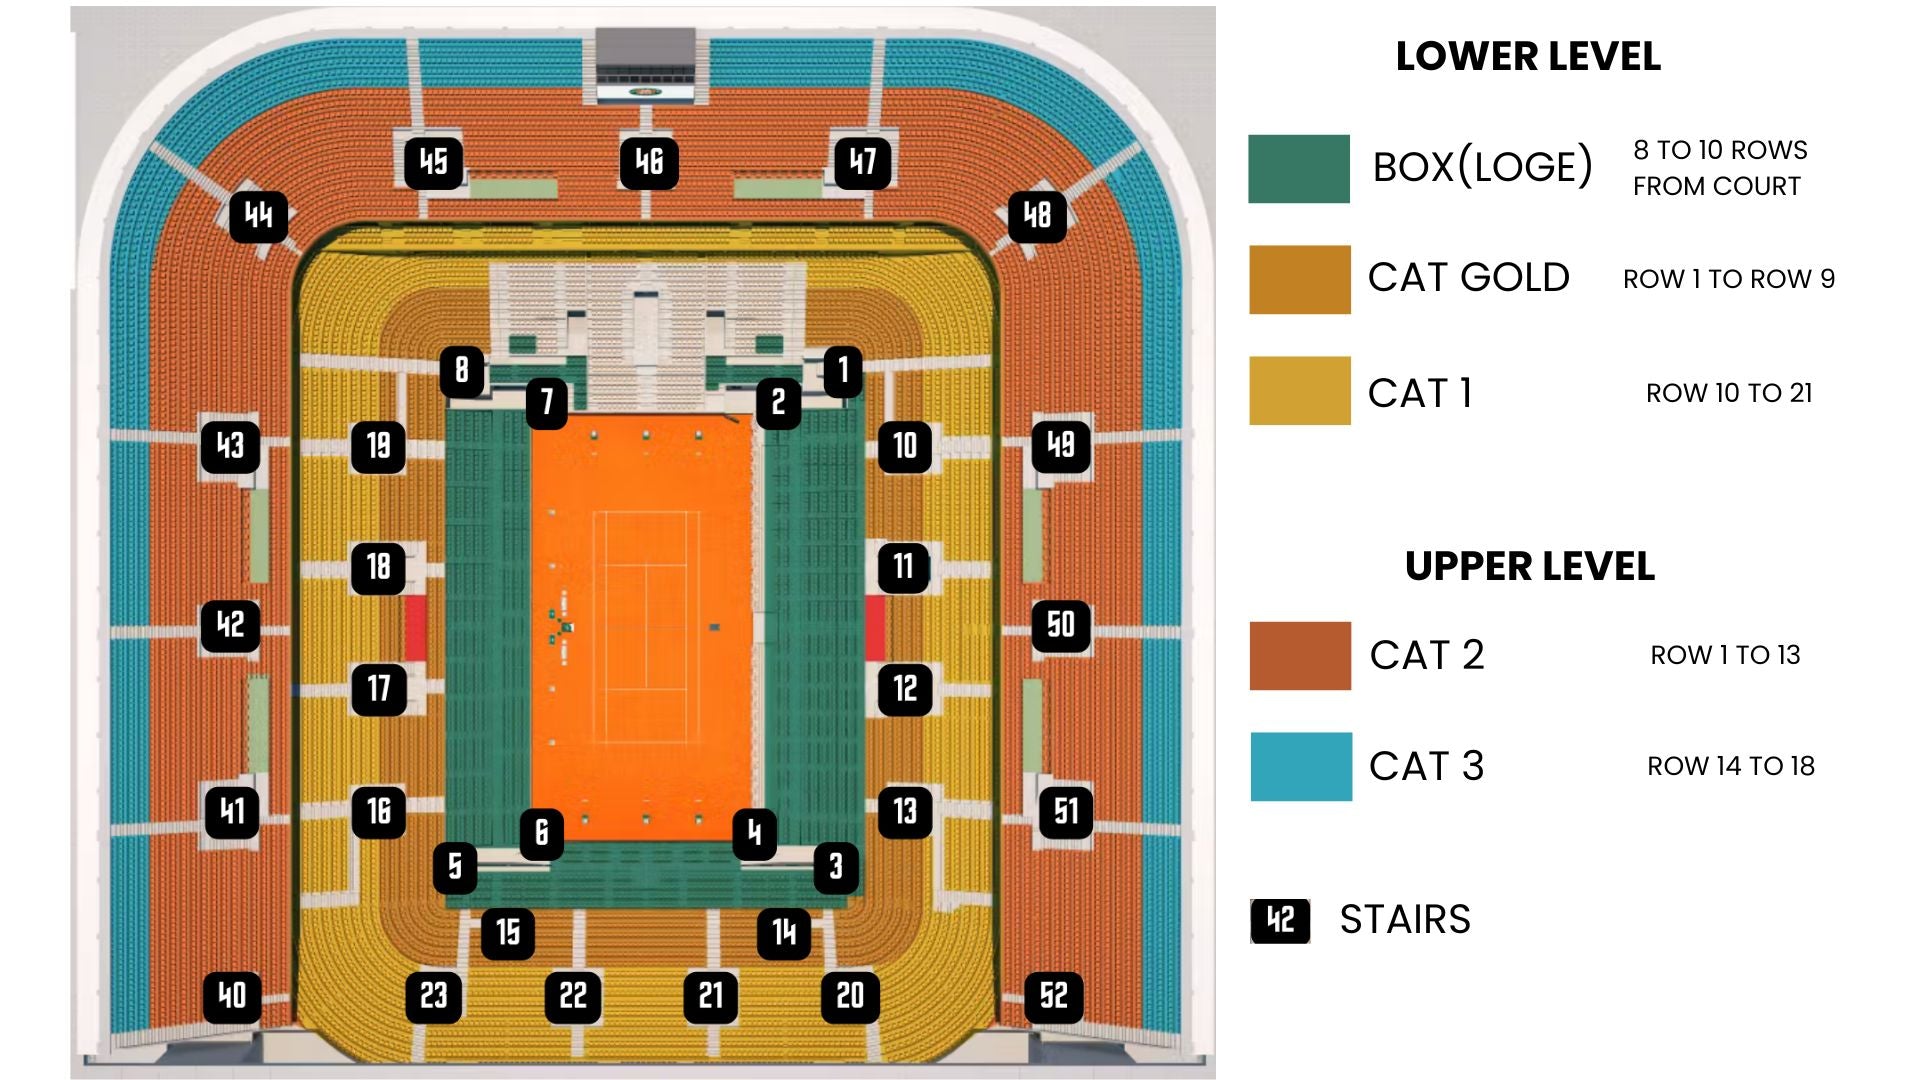 French Open Tickets 5/31/2024 -Friday Evening Session - Philippe Chatrier (Center Court)